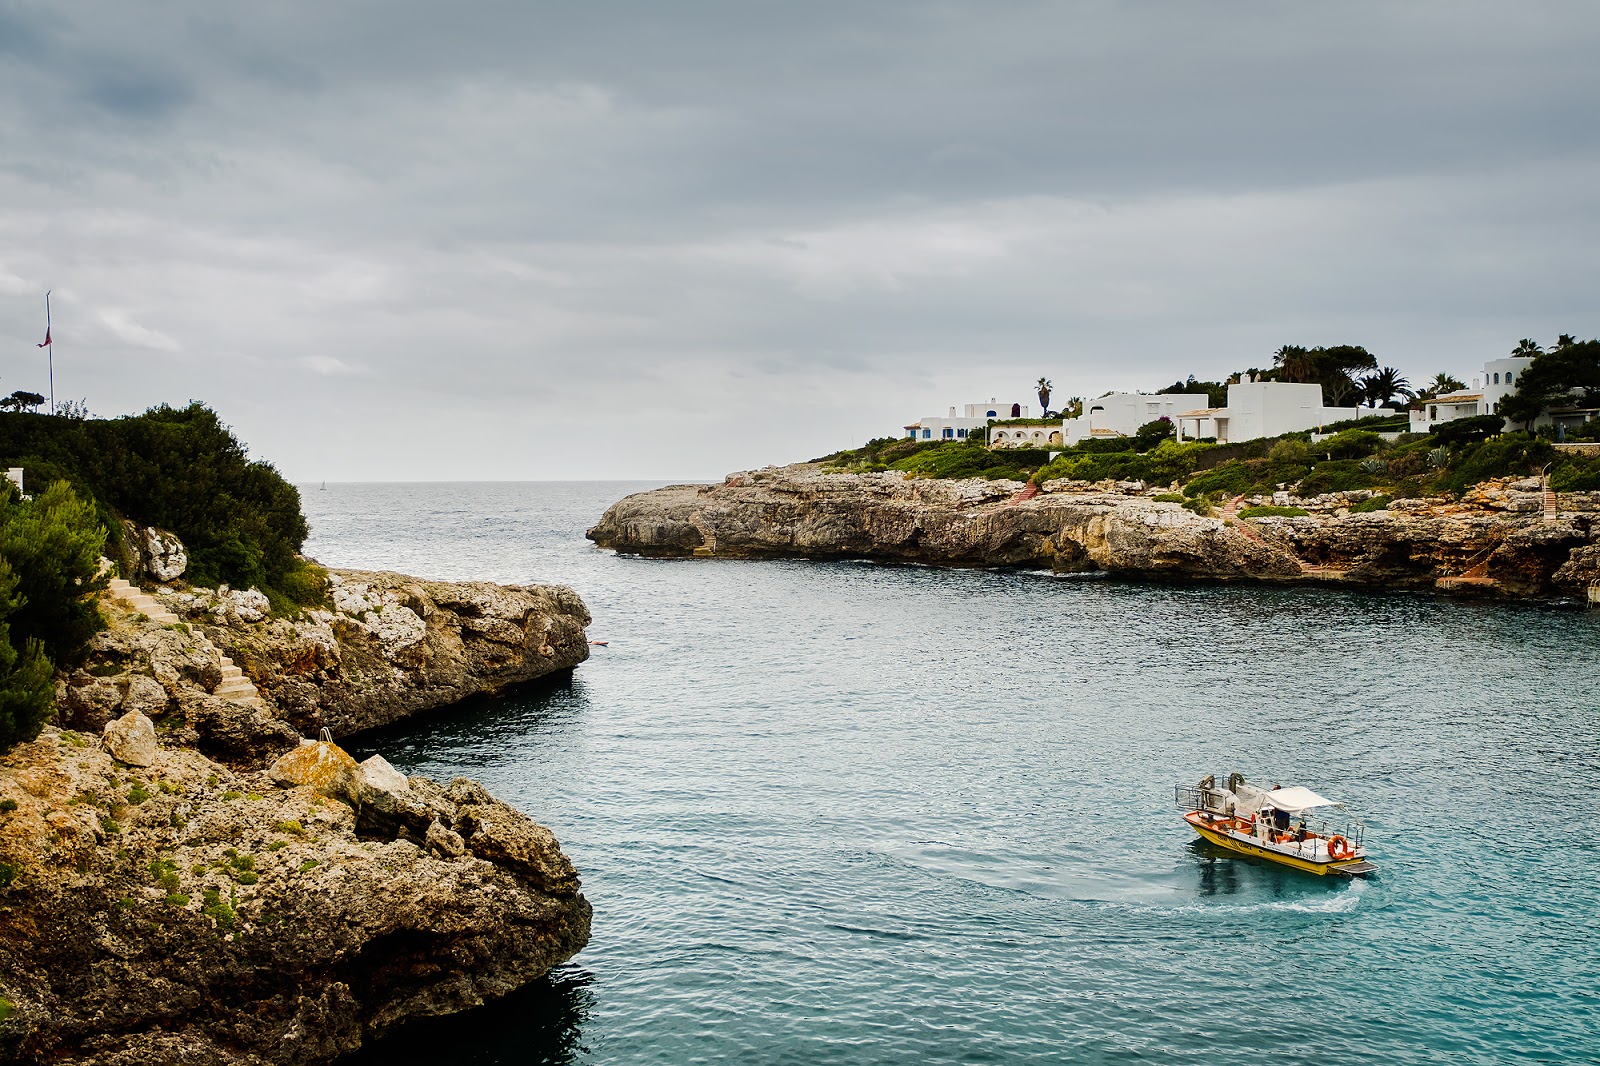 Fujifilm Xpro 2 image of Mallorca by Willie Kers Photography